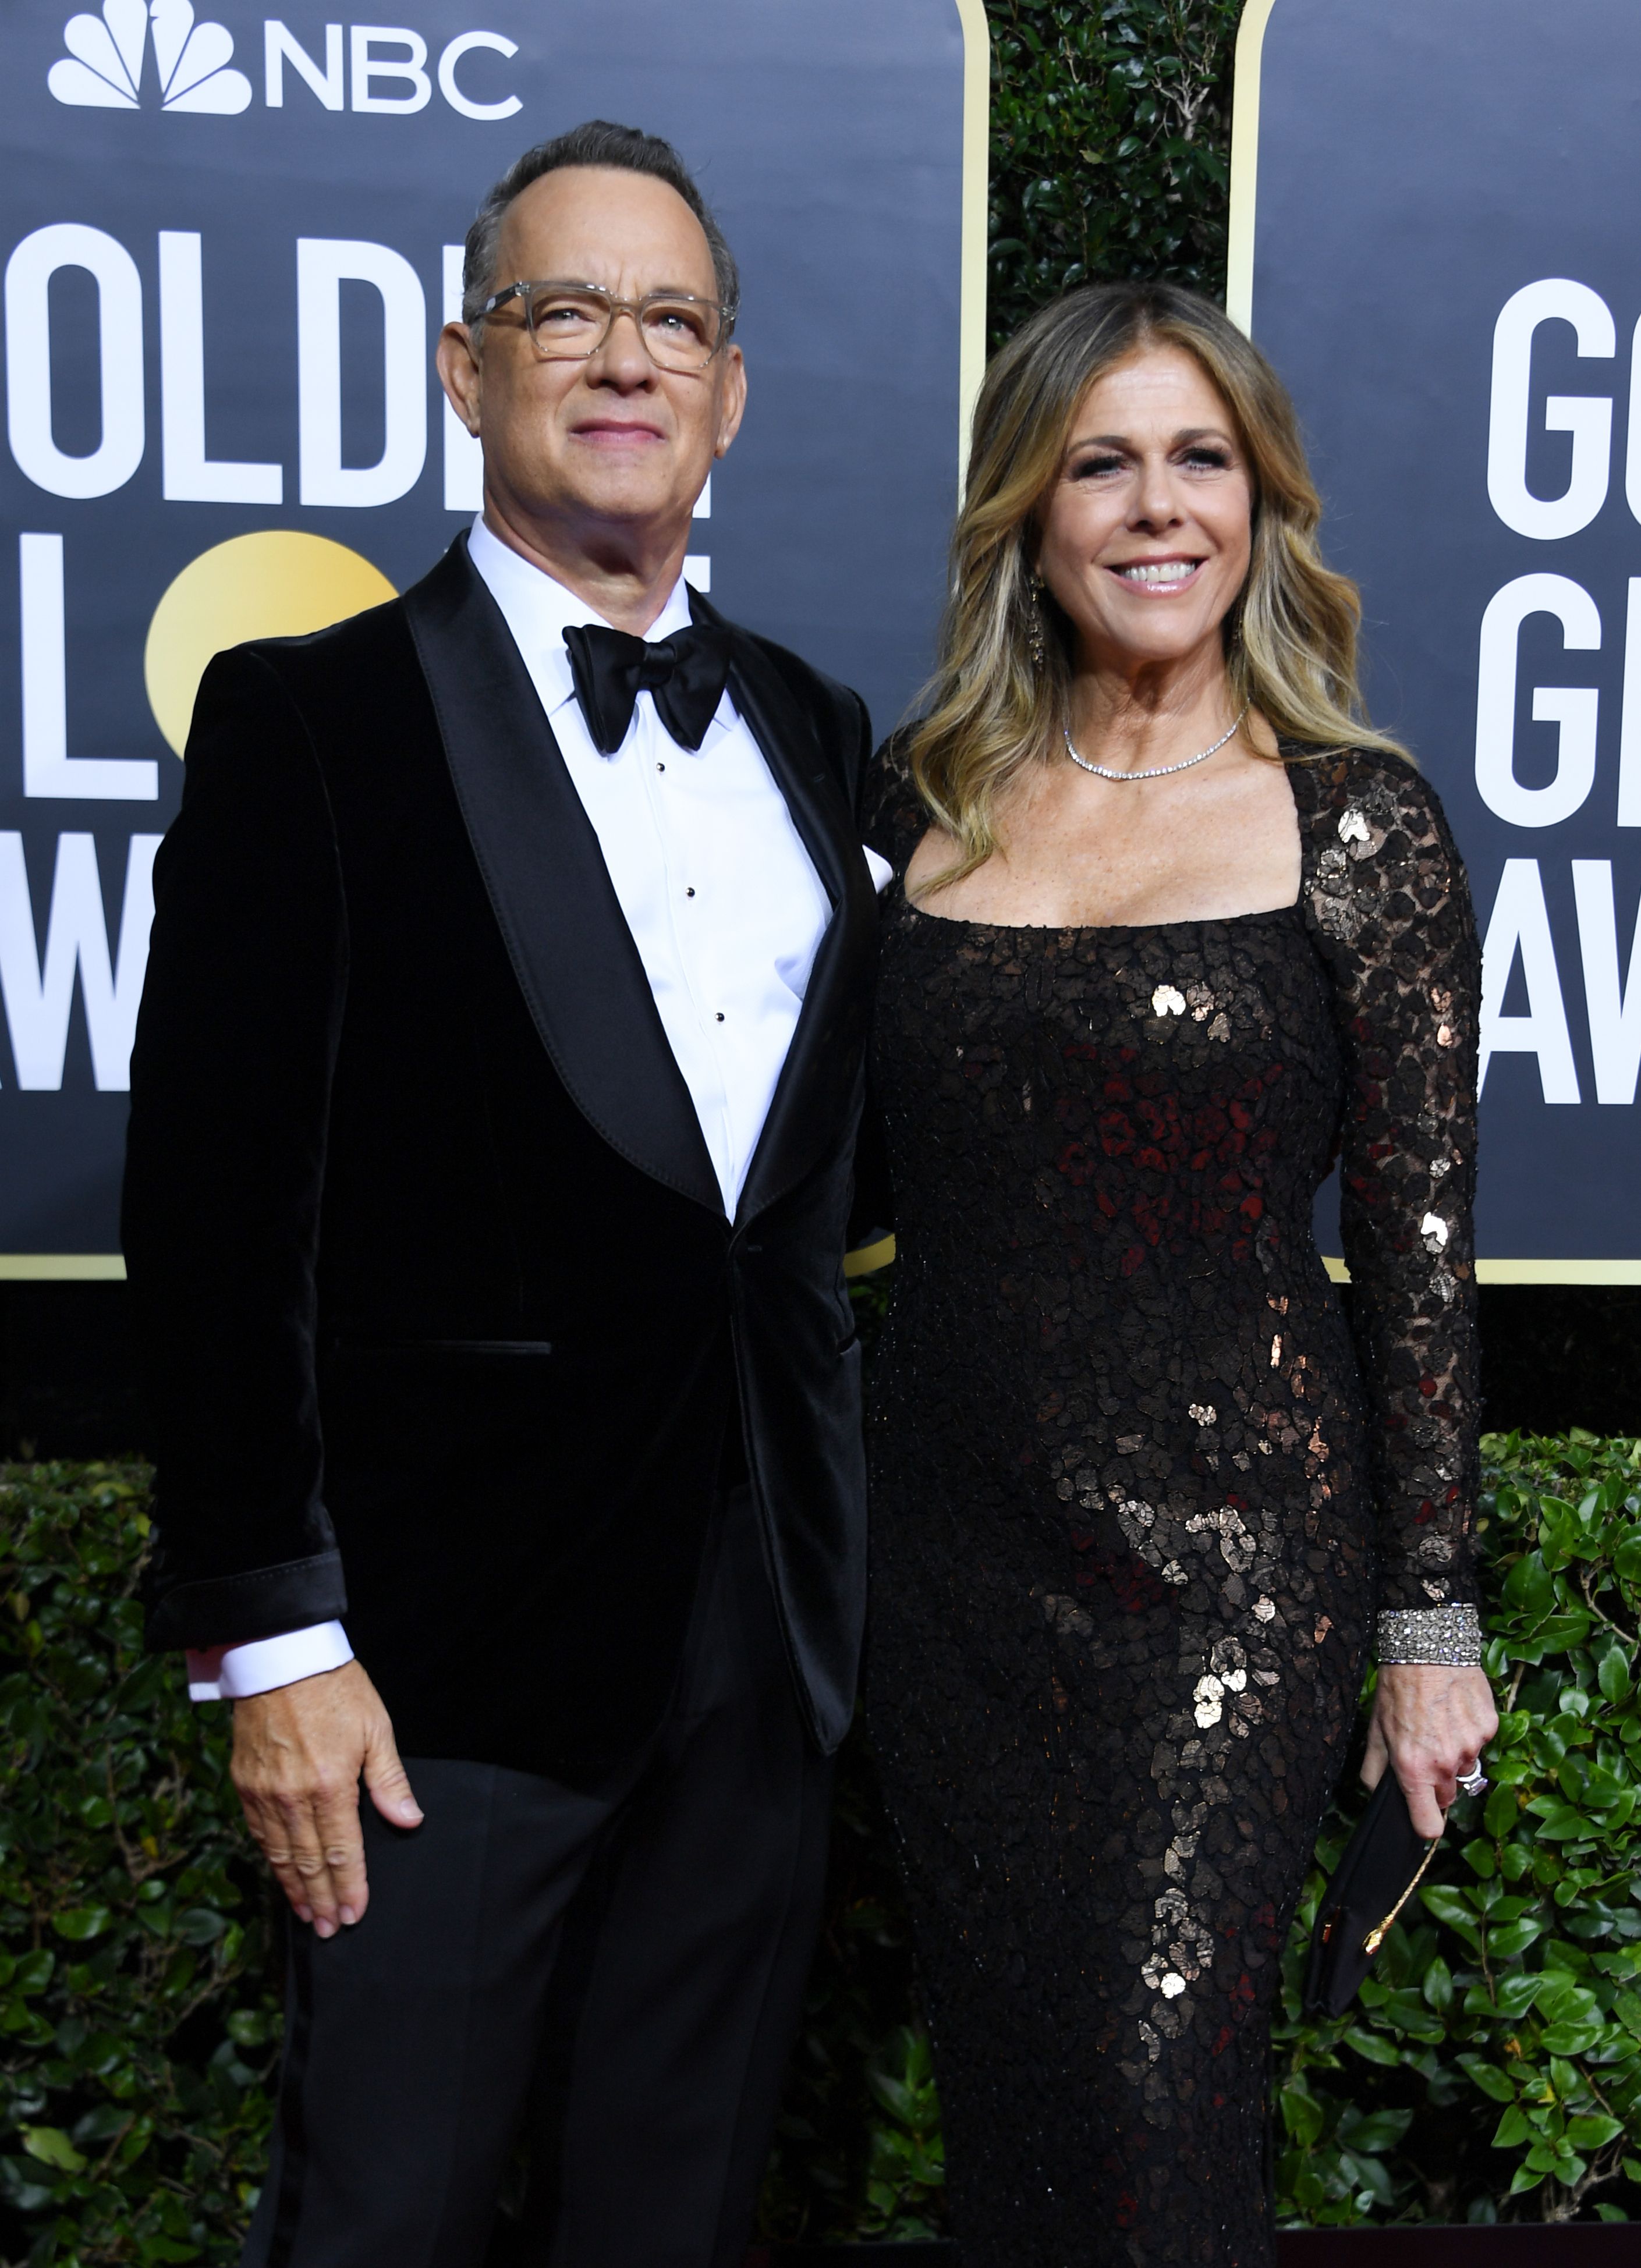 Actor Tom Hanks and wife Rita Wilson arrive for the 77th annual Golden Globe Awards on January 5, 2020, at The Beverly Hilton hotel in Beverly Hills, California. | Source: Getty Images